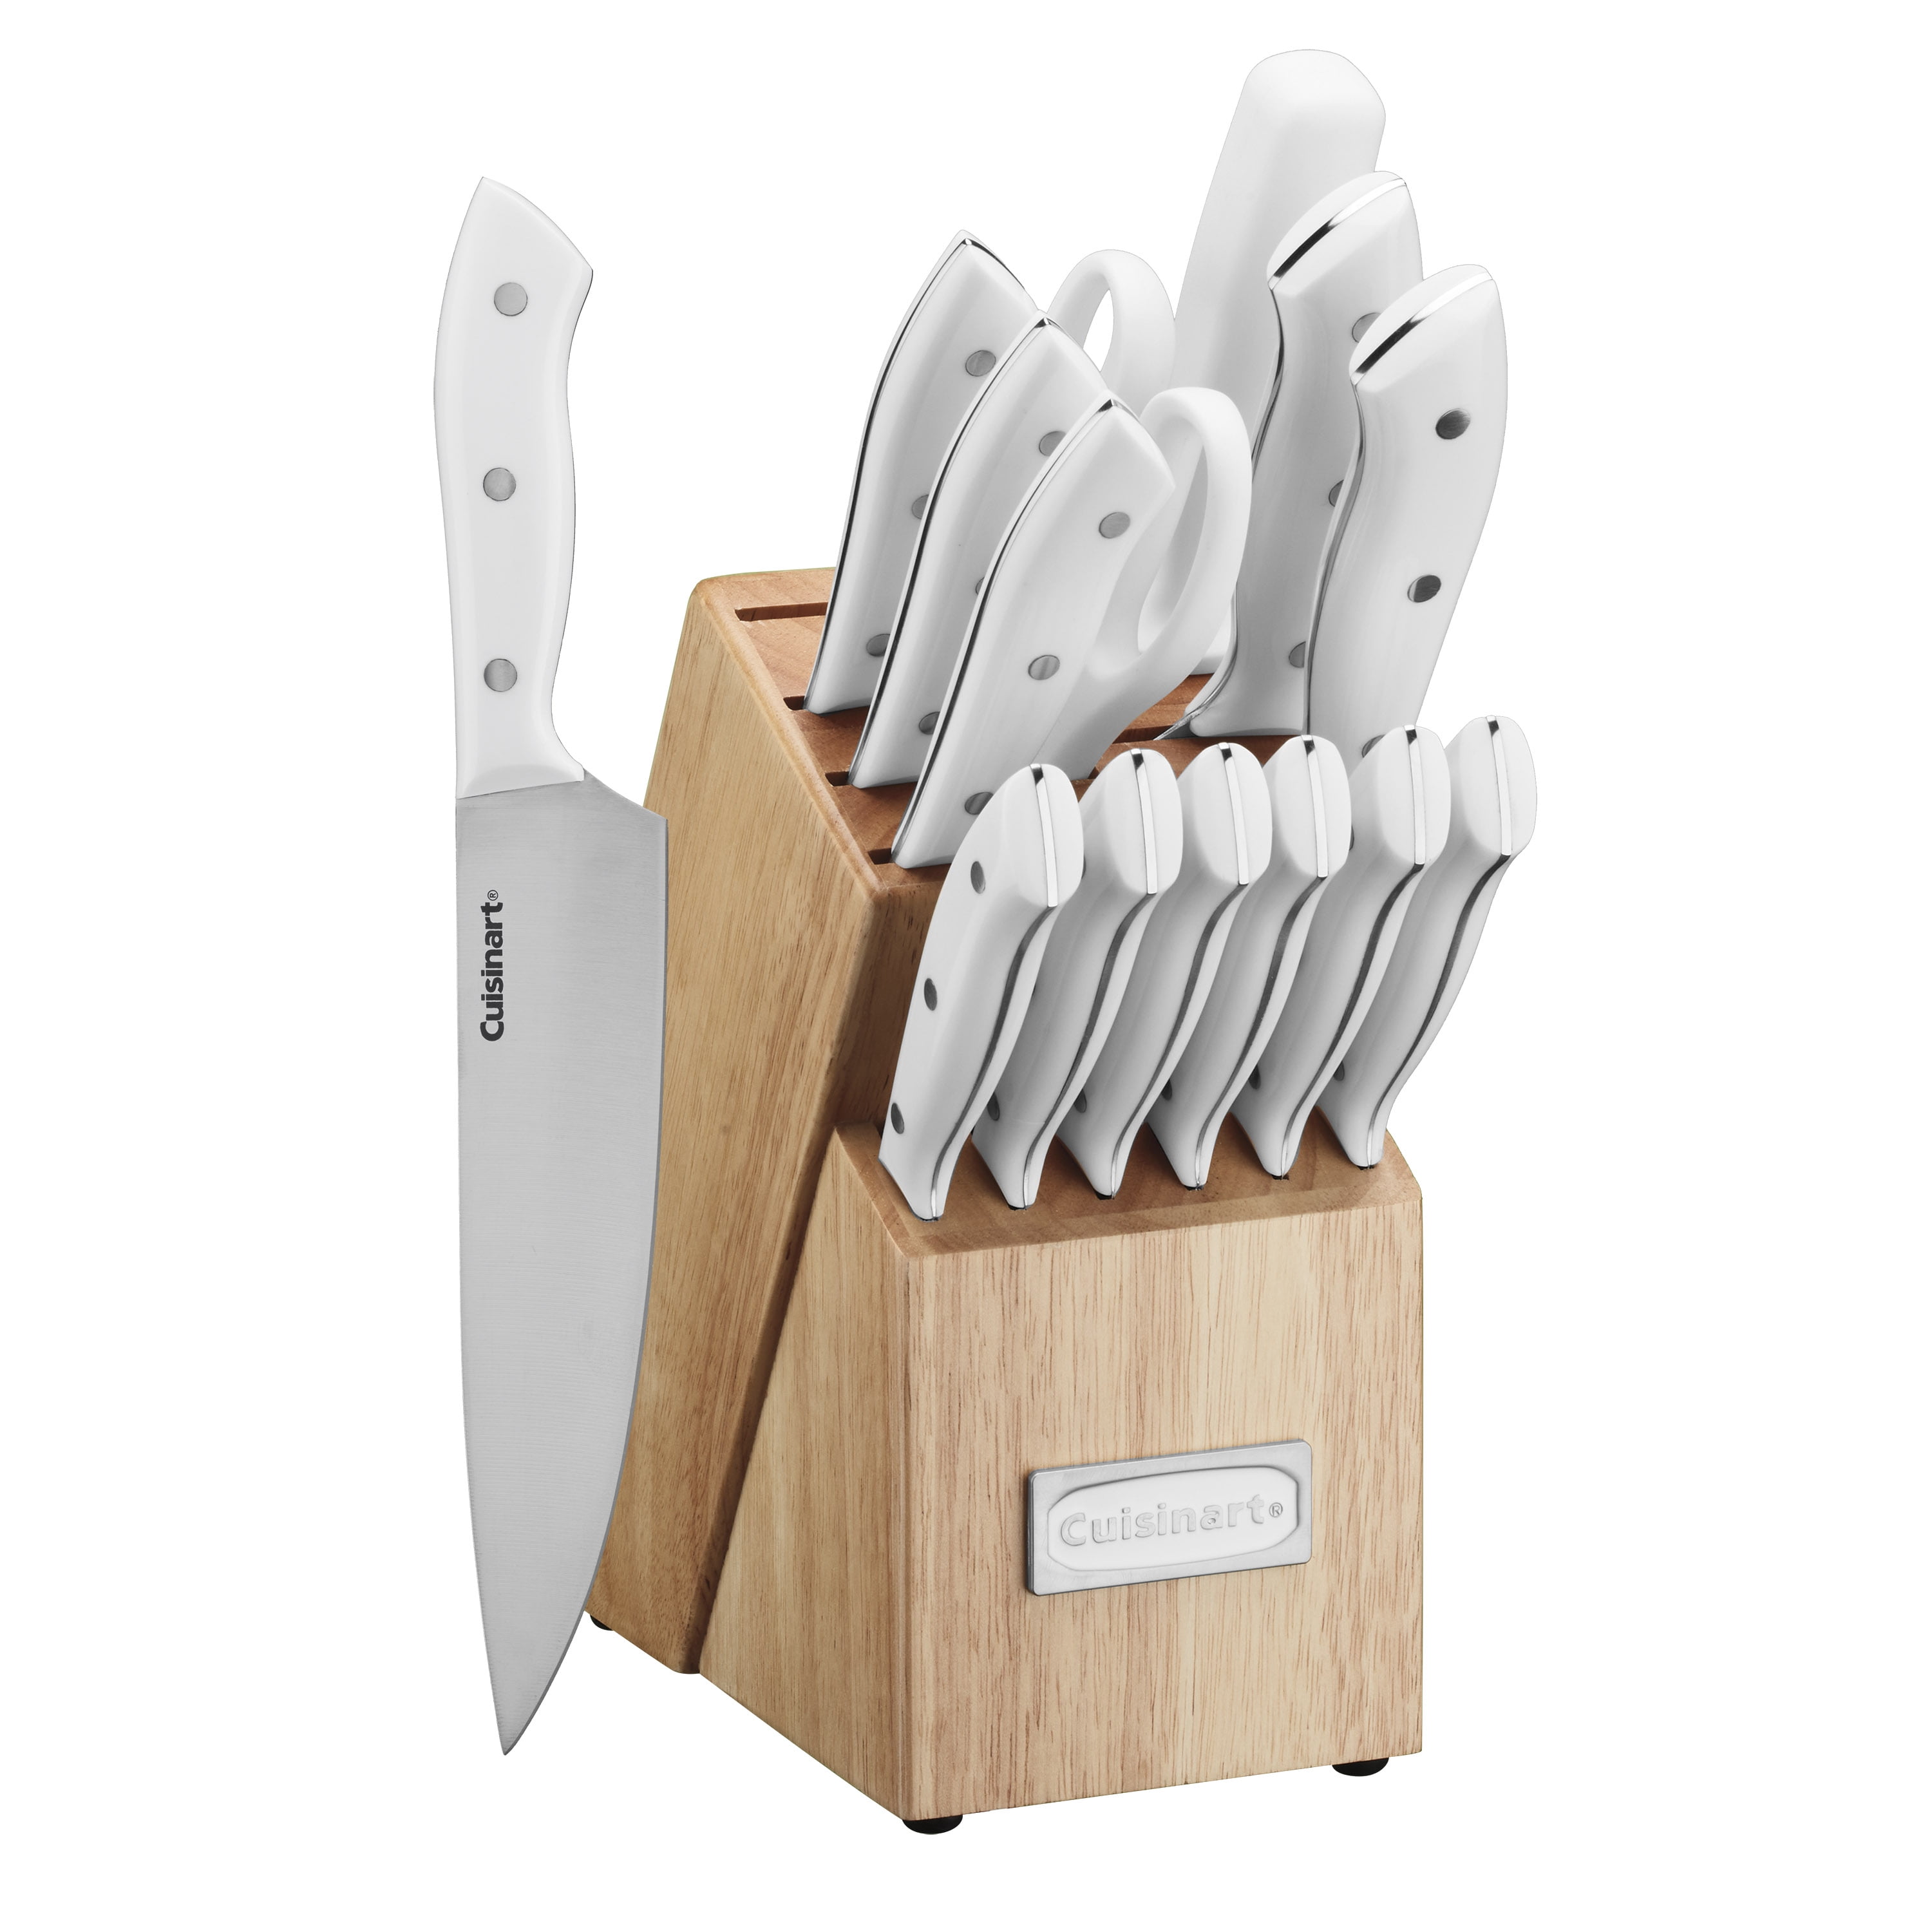 Triple Riveted Slim Knife Block Set With Built in Sharpener 14-piece in  White Tools Free Shipping Set of Kitchen Knives Cleaver - AliExpress